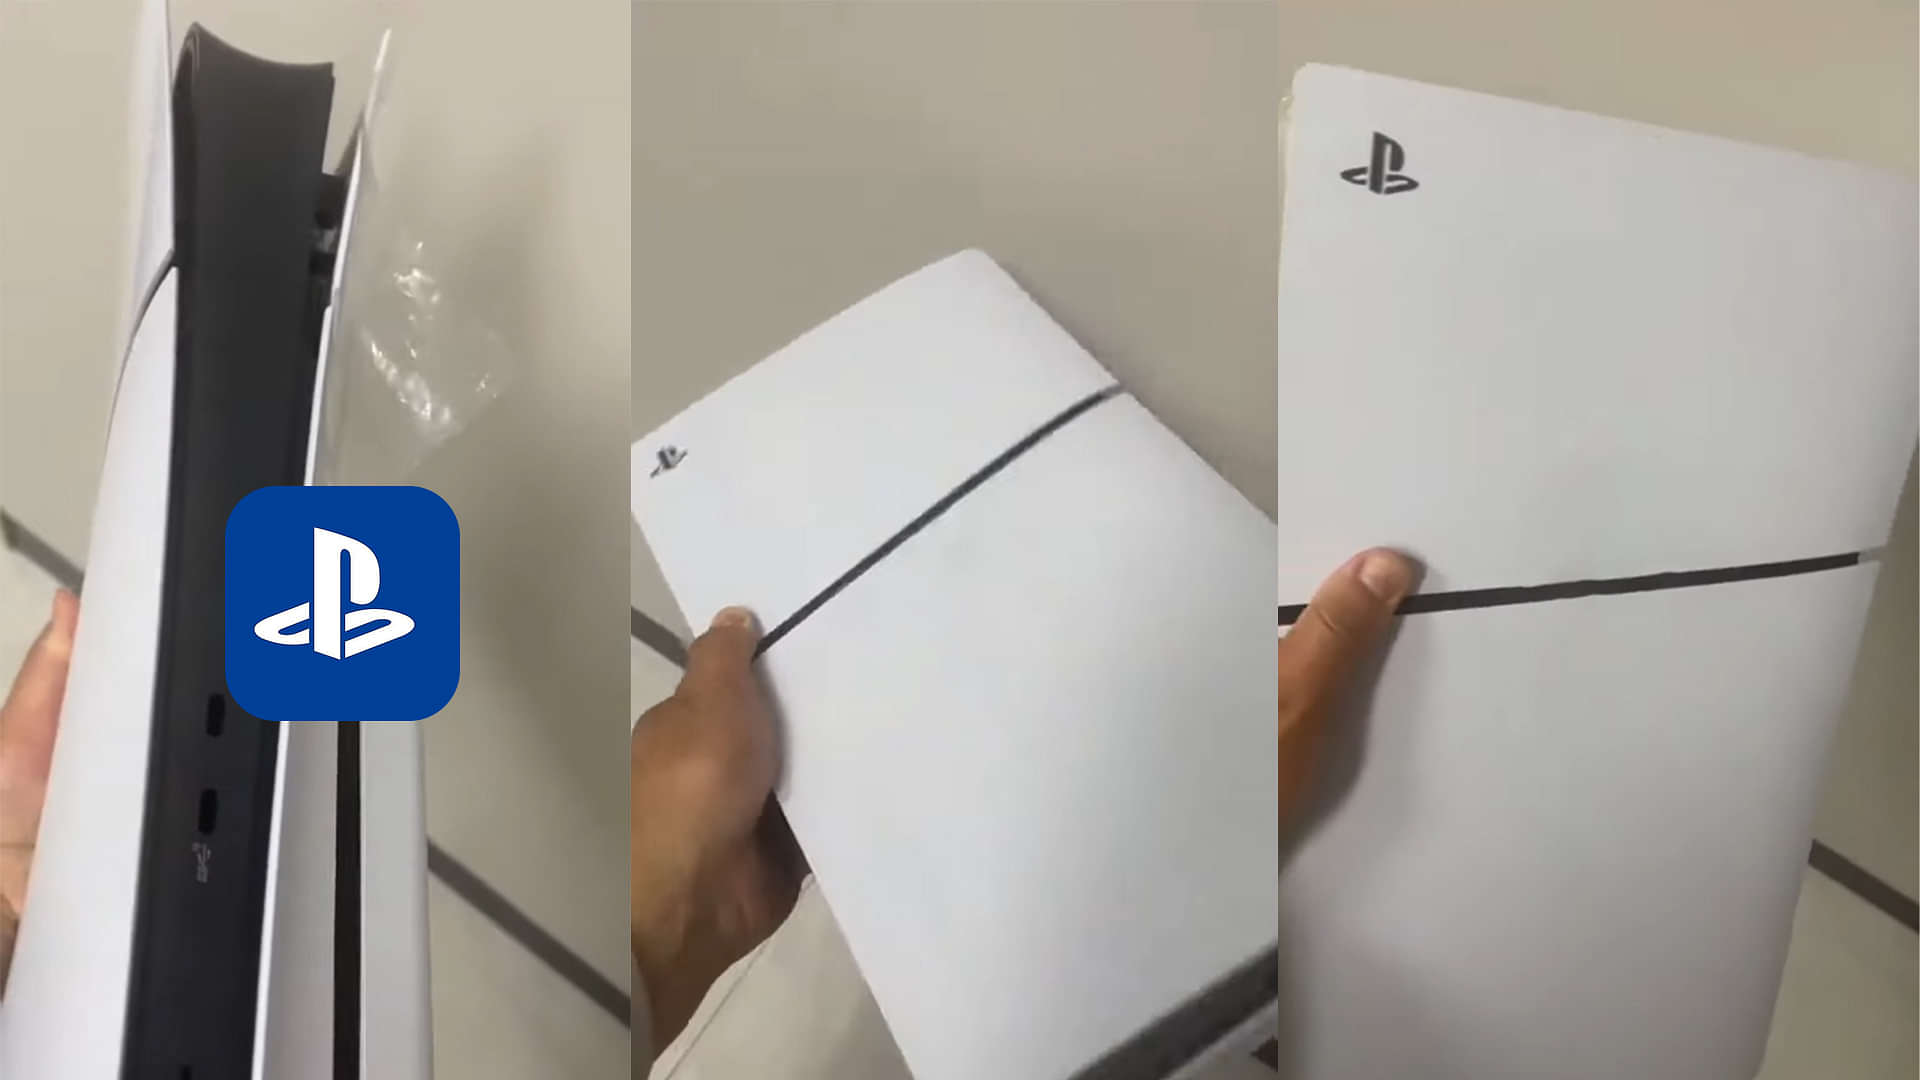 PS5 Slim - When is the global release date?